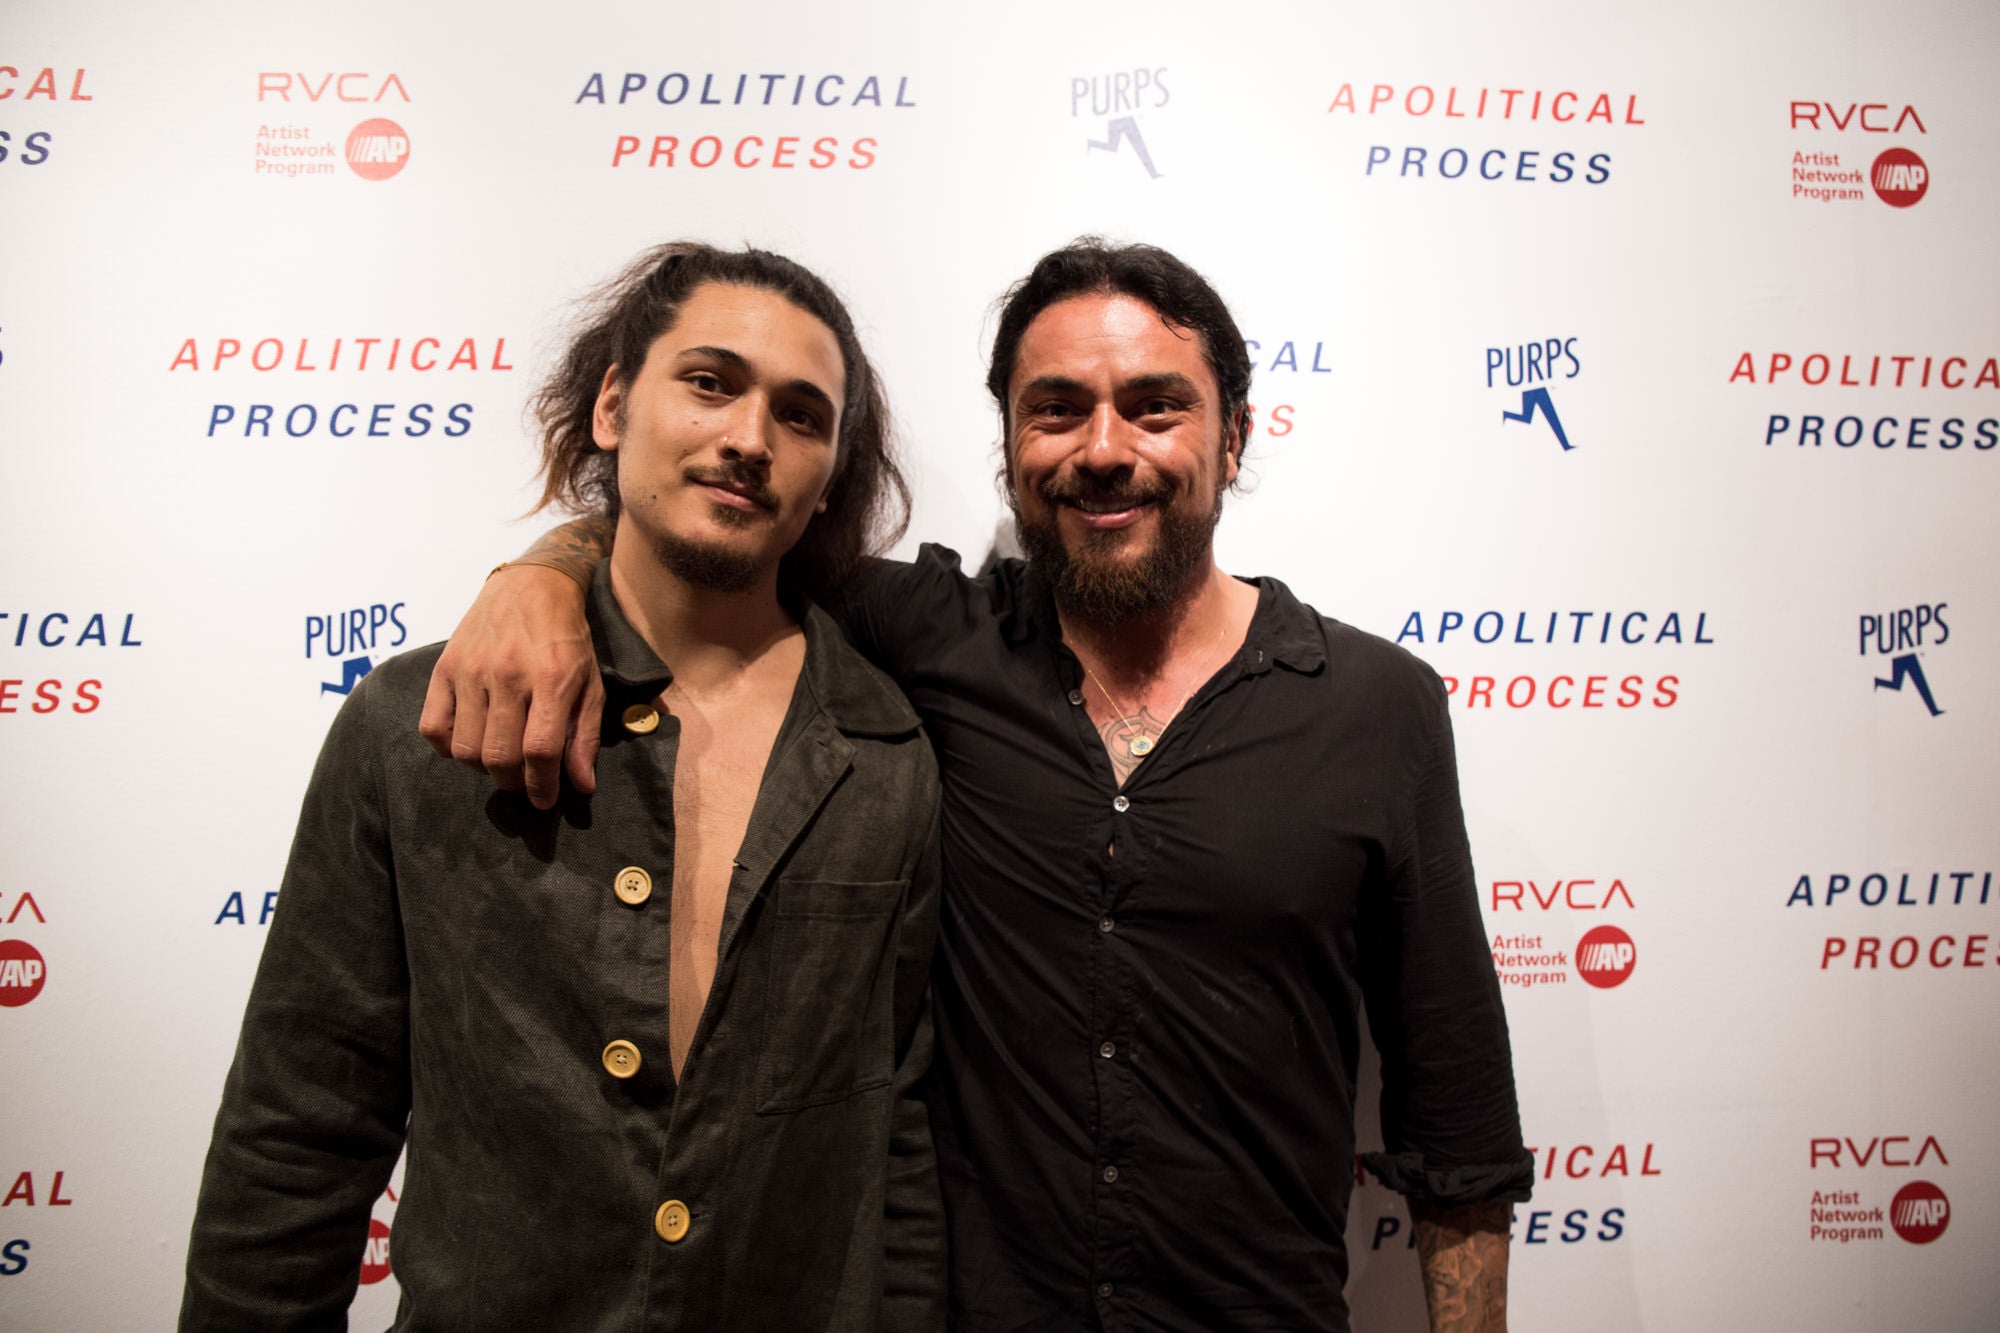 Apolitical Process || A Vision by Kelly Slater || Curated by PM Tenore